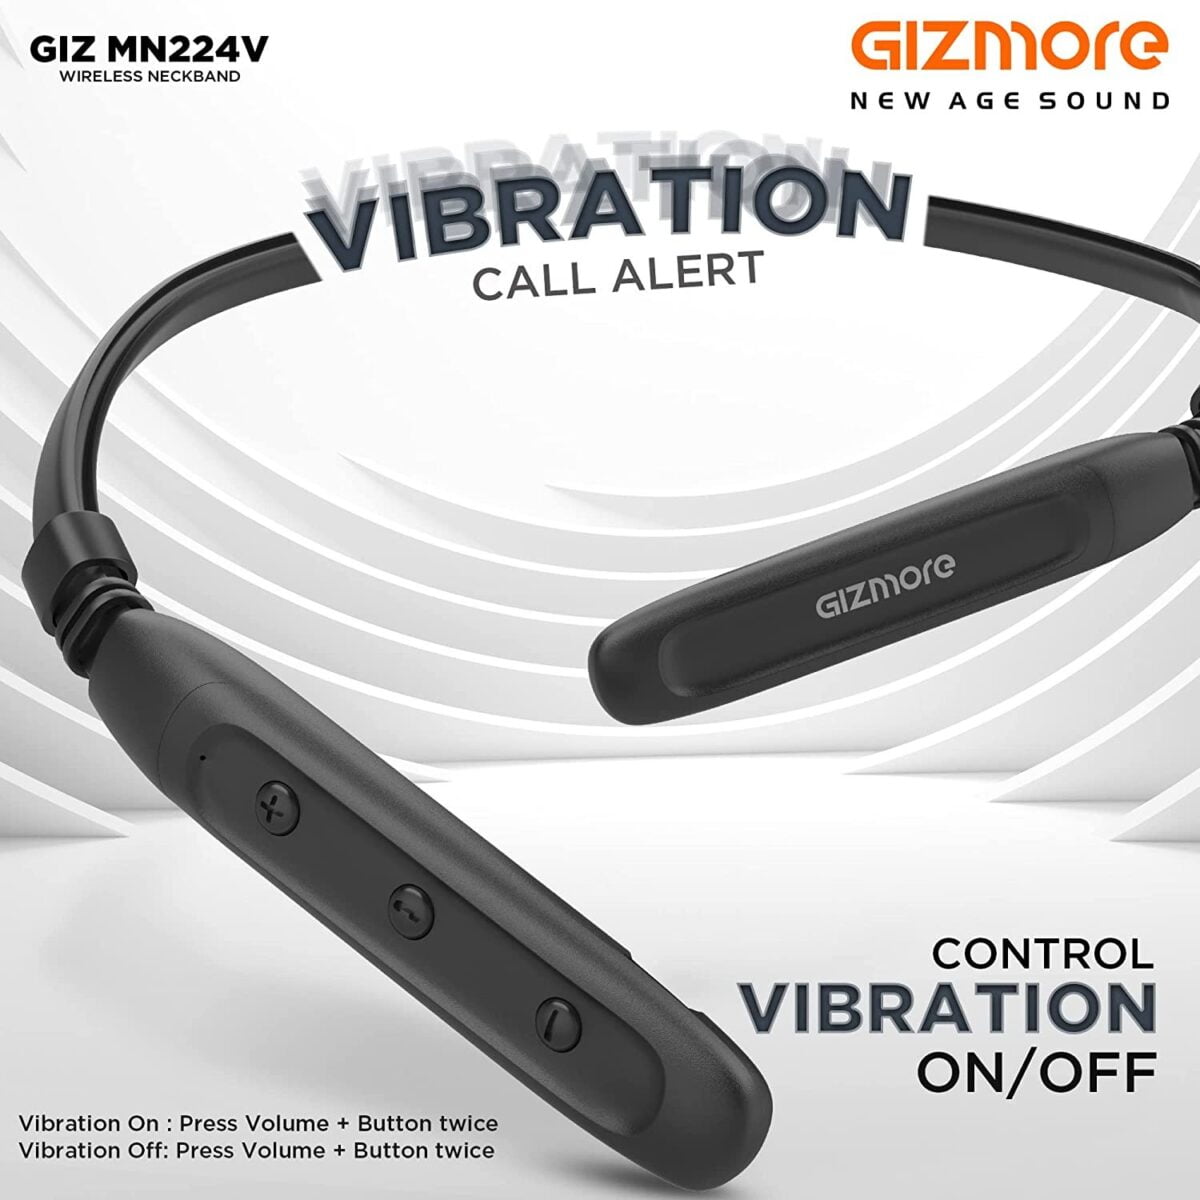 Gizmore MN224V Bluetooth Wireless Neckband 4 Shop Mobile Accessories Online in India